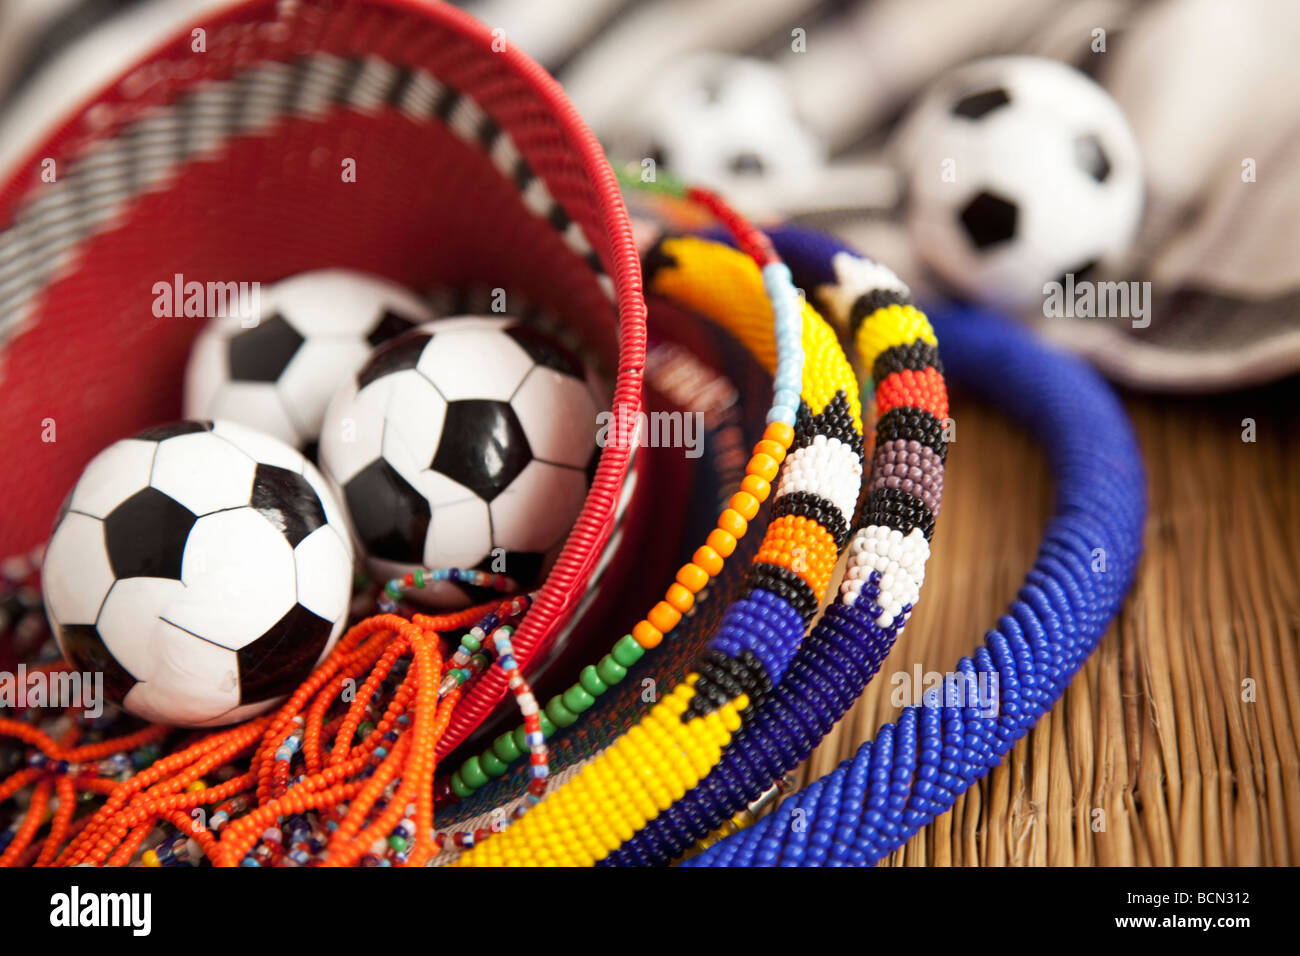 A close-up of African beadwork and miniature soccer balls in a beaded woven African basket Stock Photo